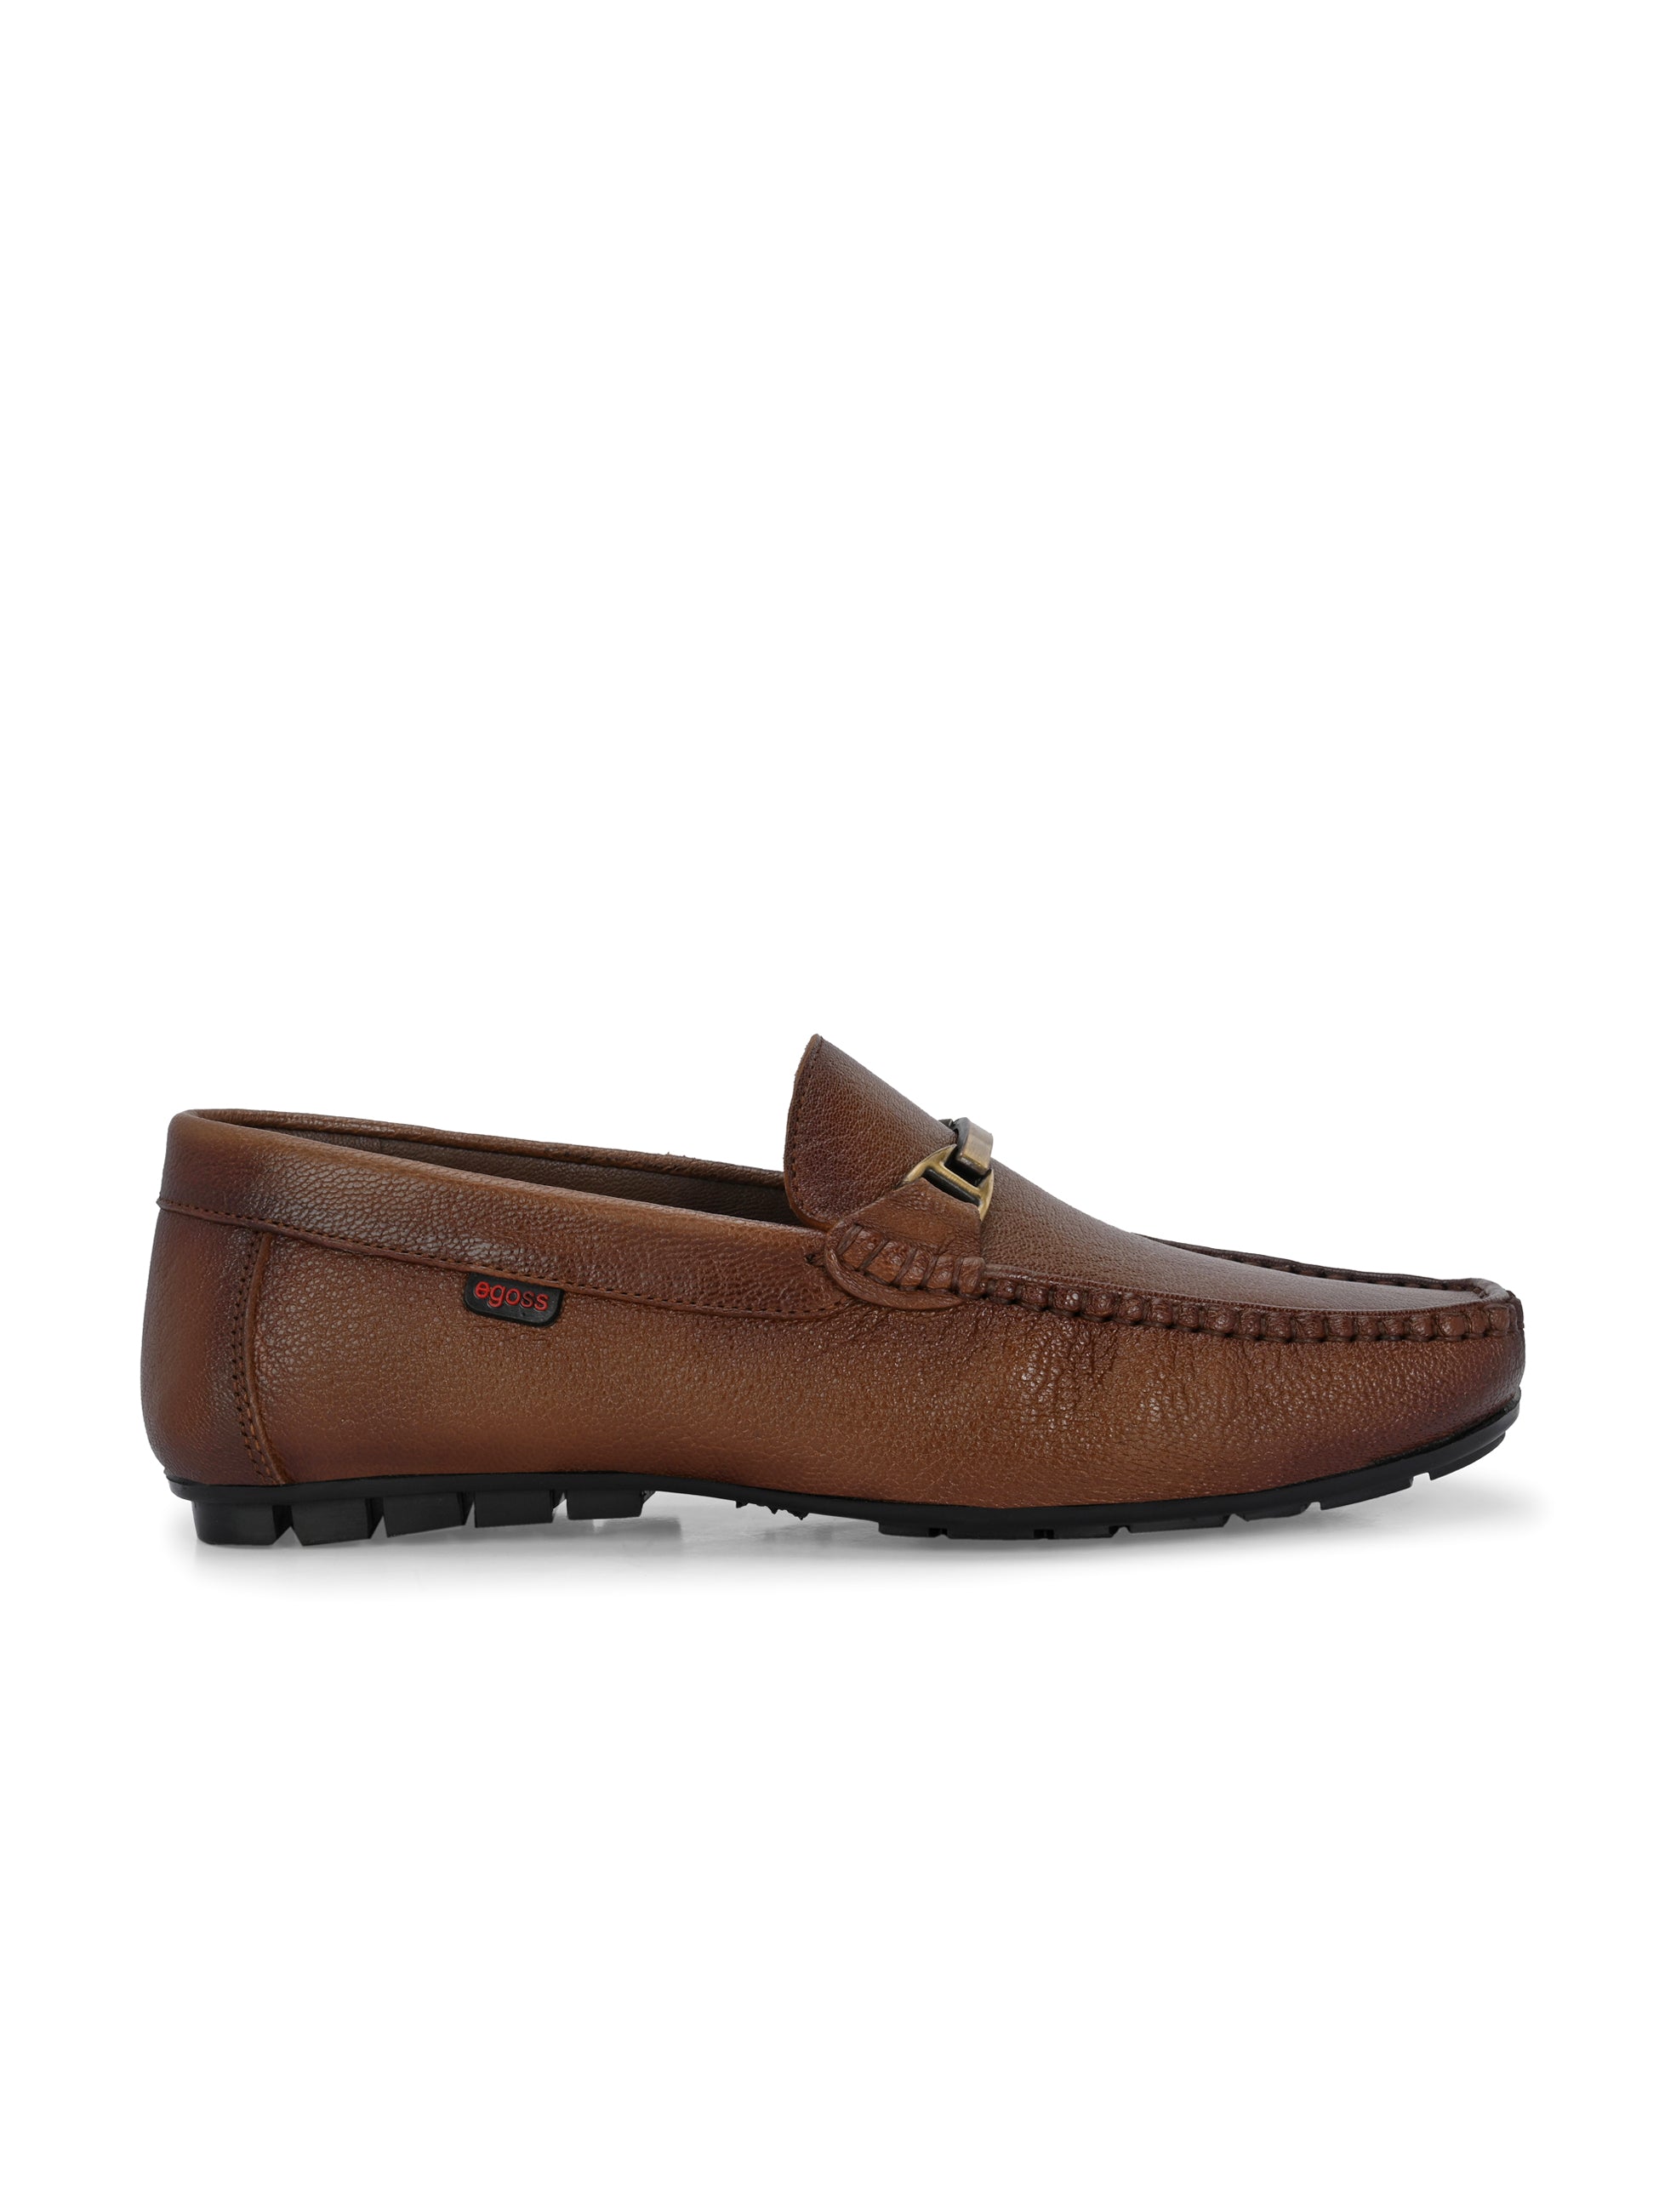 Leather Loafers Shoes For Men